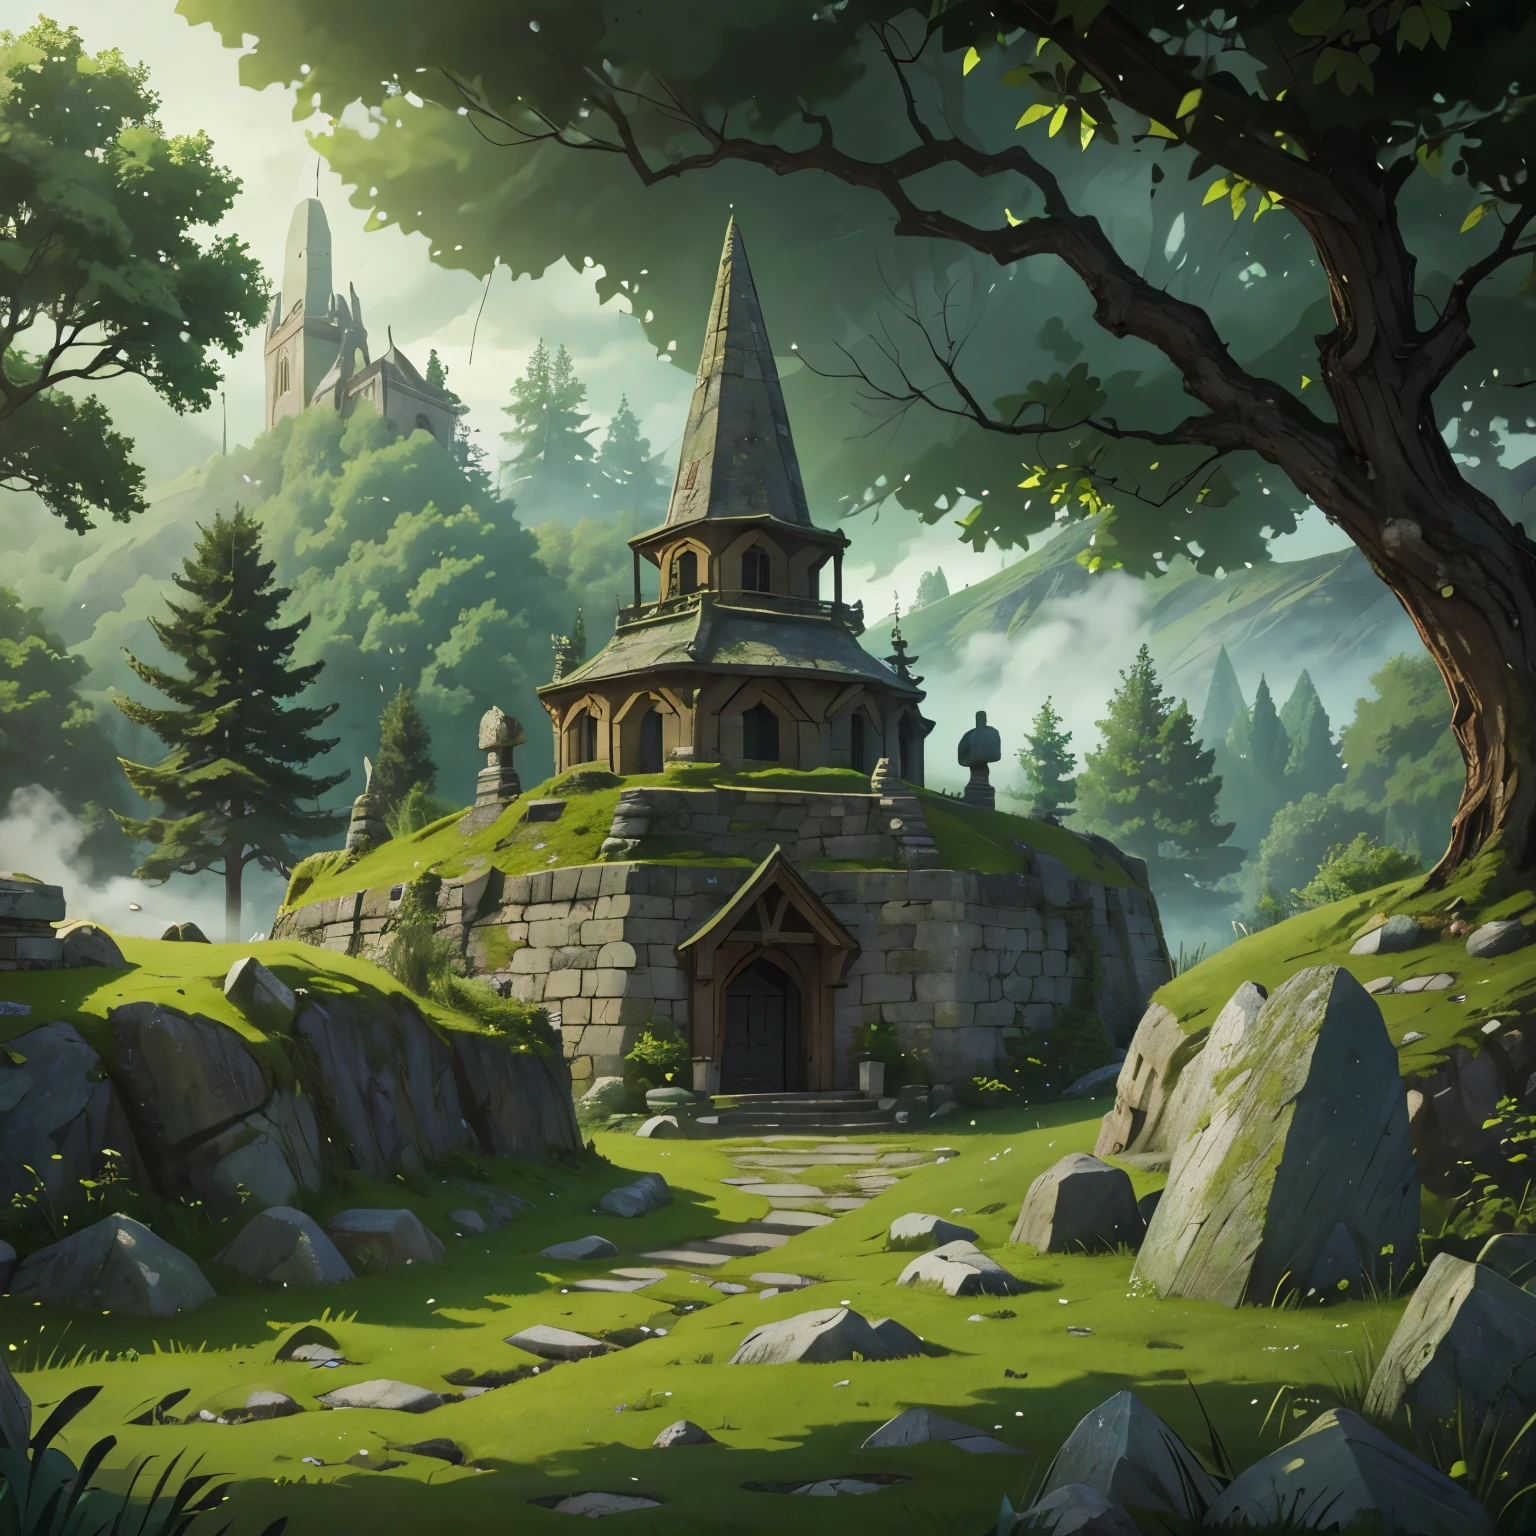 contemporary landscape, medieval village, stone building, stone temple in middle, viking burial mound, cracked stones, green foliage, green bushes, green grass, green moss, forest, smoke, mist, mysterious atmosphere, lone wonderer, flapping cloak